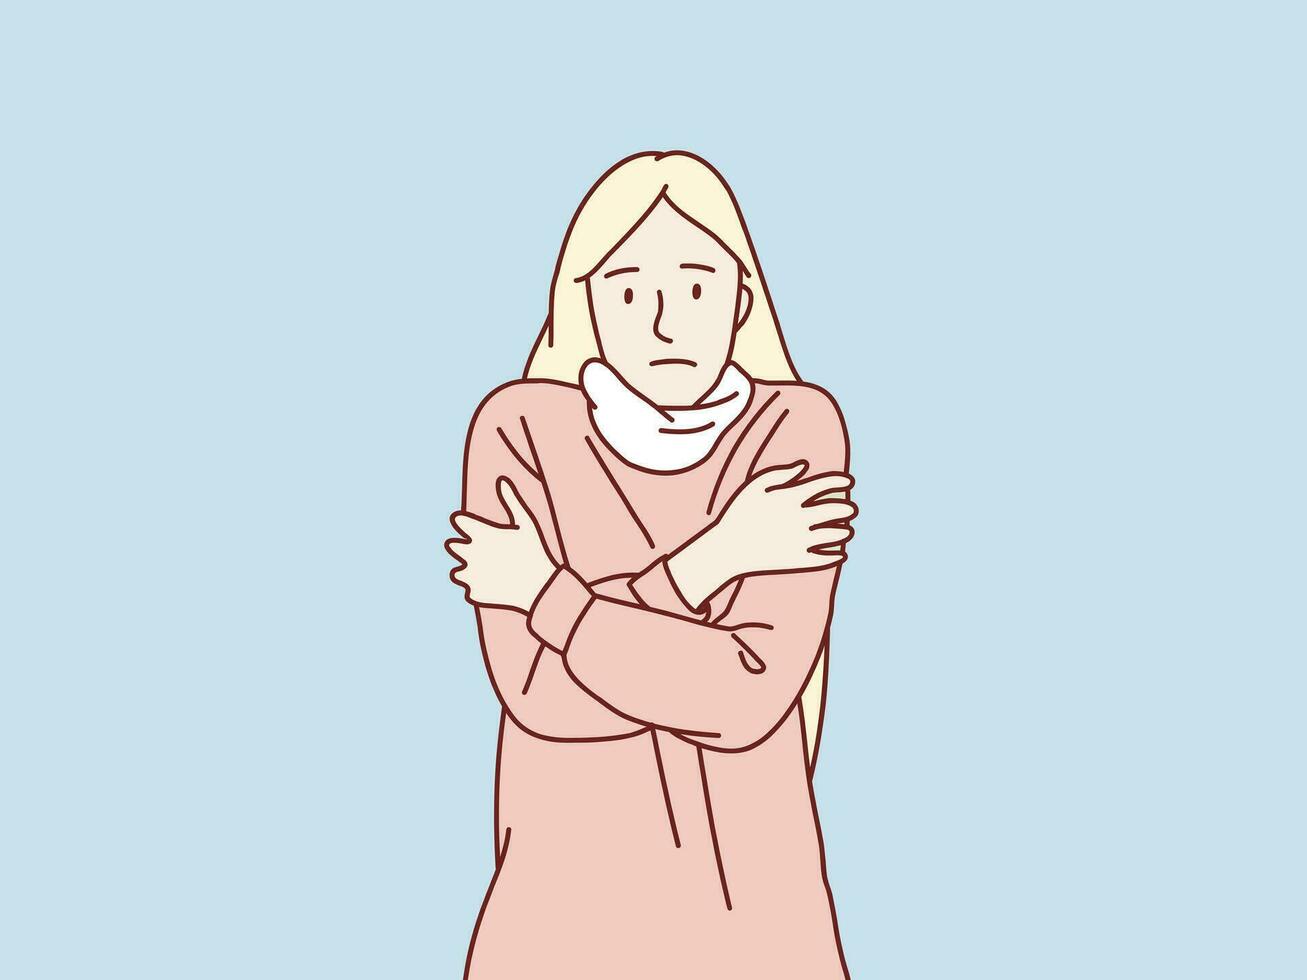 Young Girl in sweater and scarf shivering from cold feel sick simple korean style illustration vector